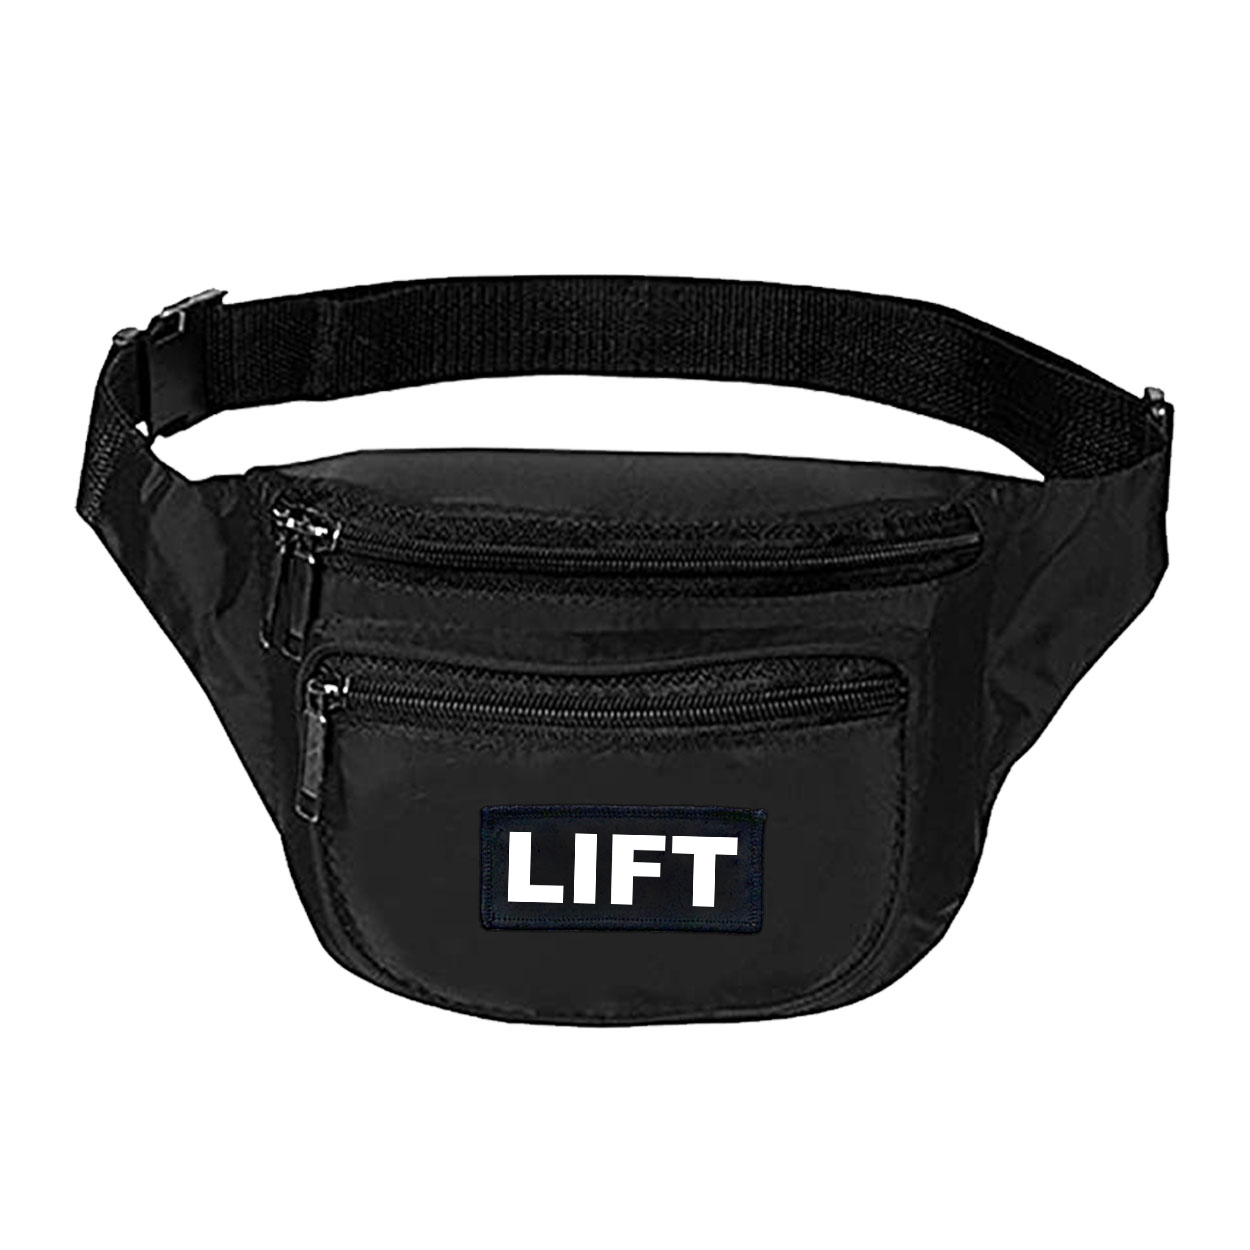 Lift Brand Logo Night Out Woven Patch Fanny Pack Black